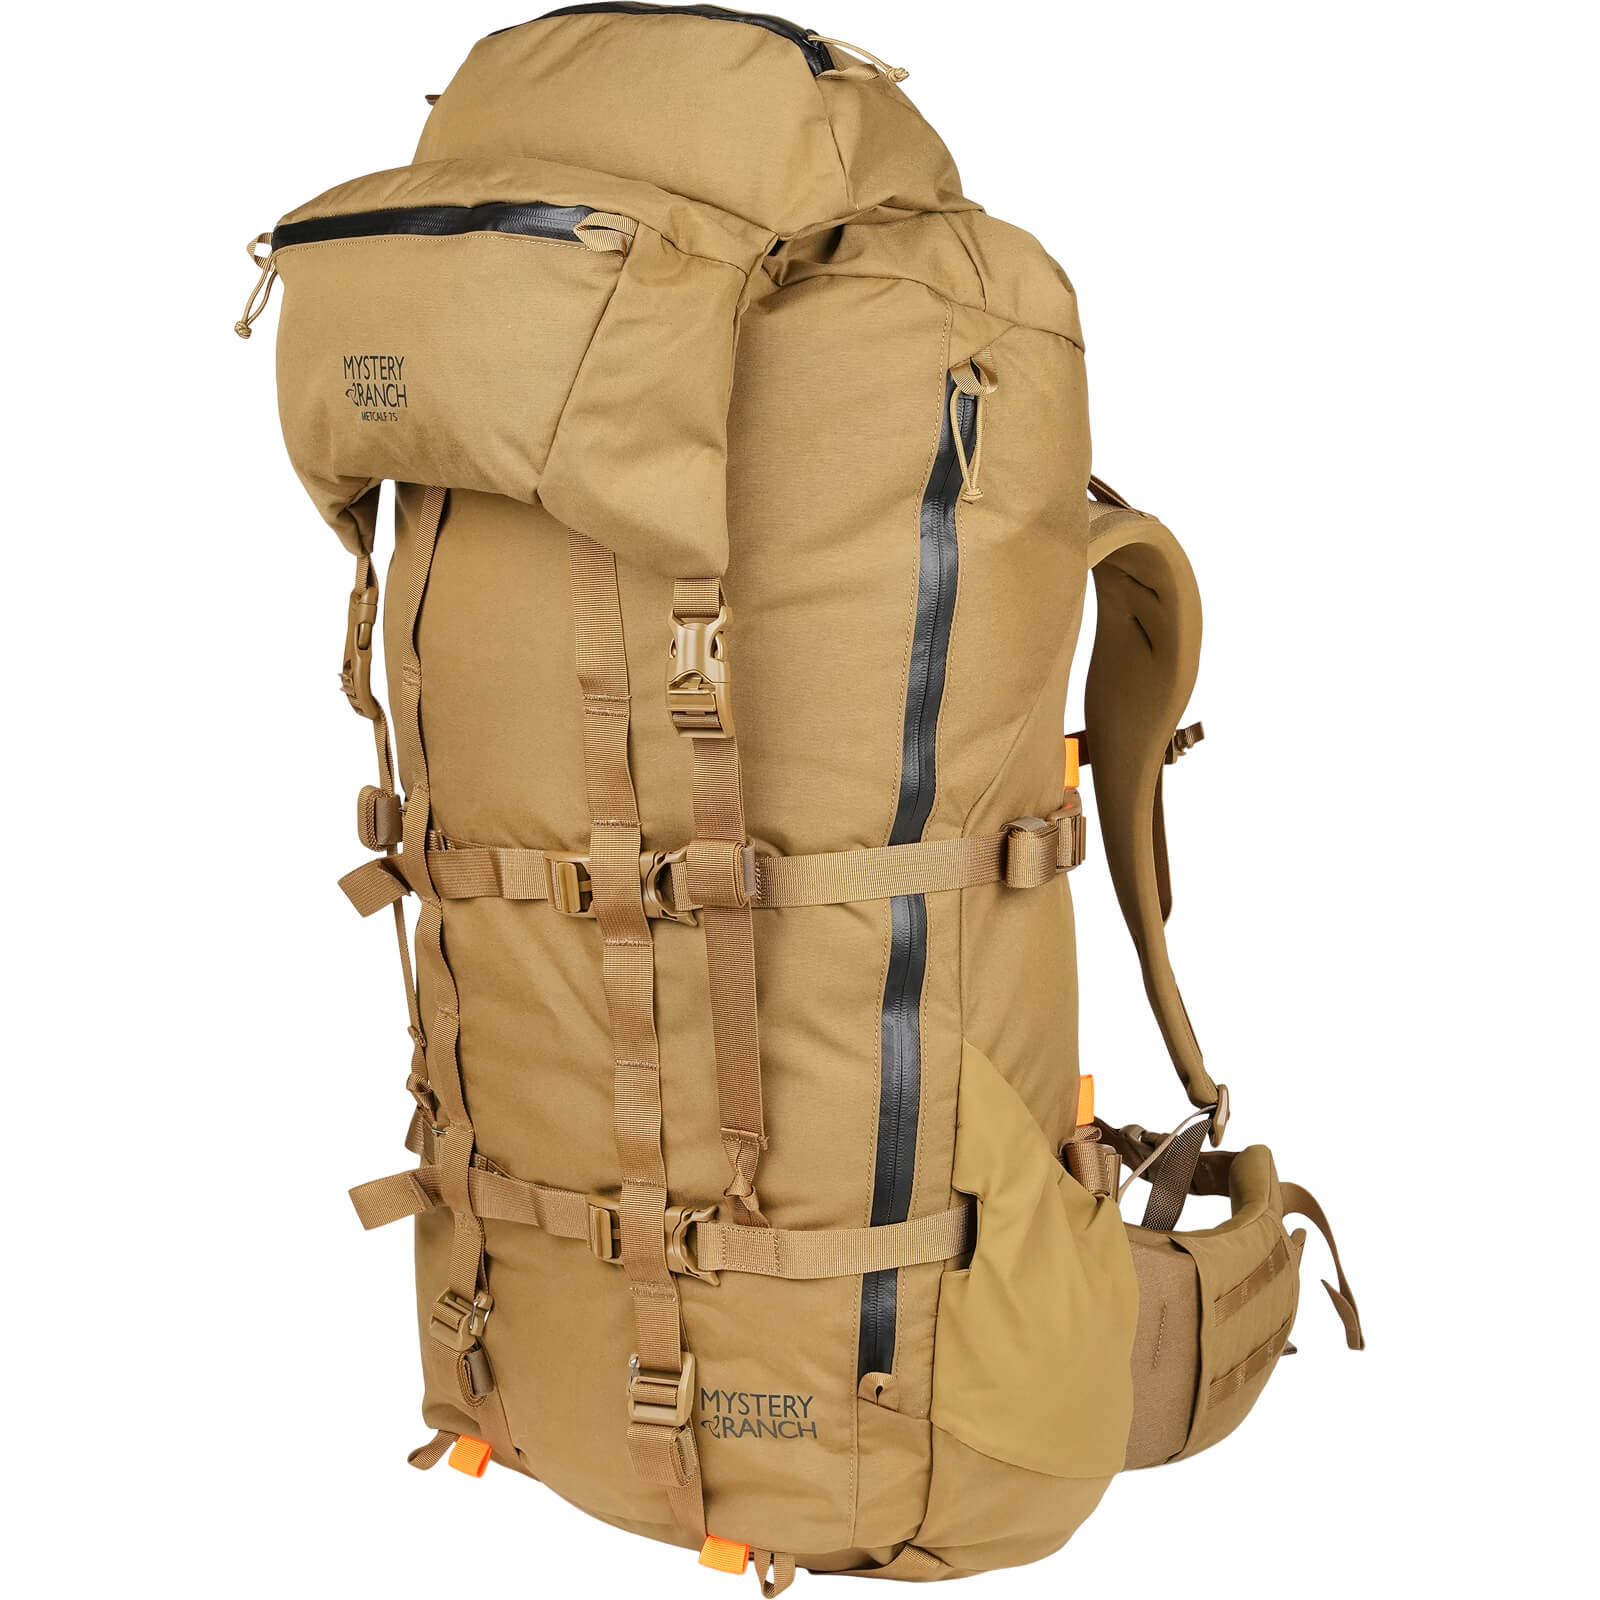 Metcalf 75 Pack | MYSTERY RANCH Backpacks